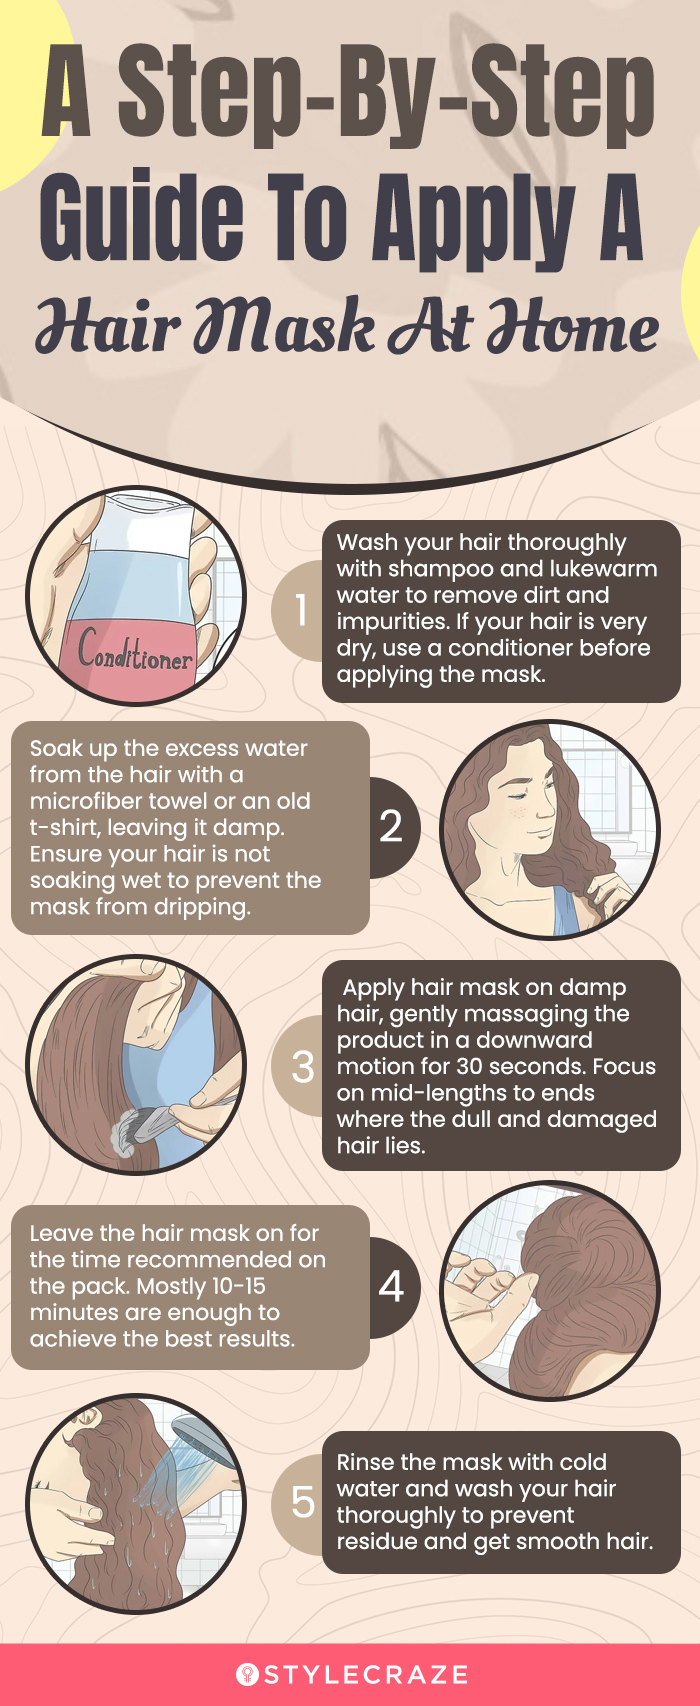 A Step-By-Step Guide To Apply Hair Mask At Home (infographic)